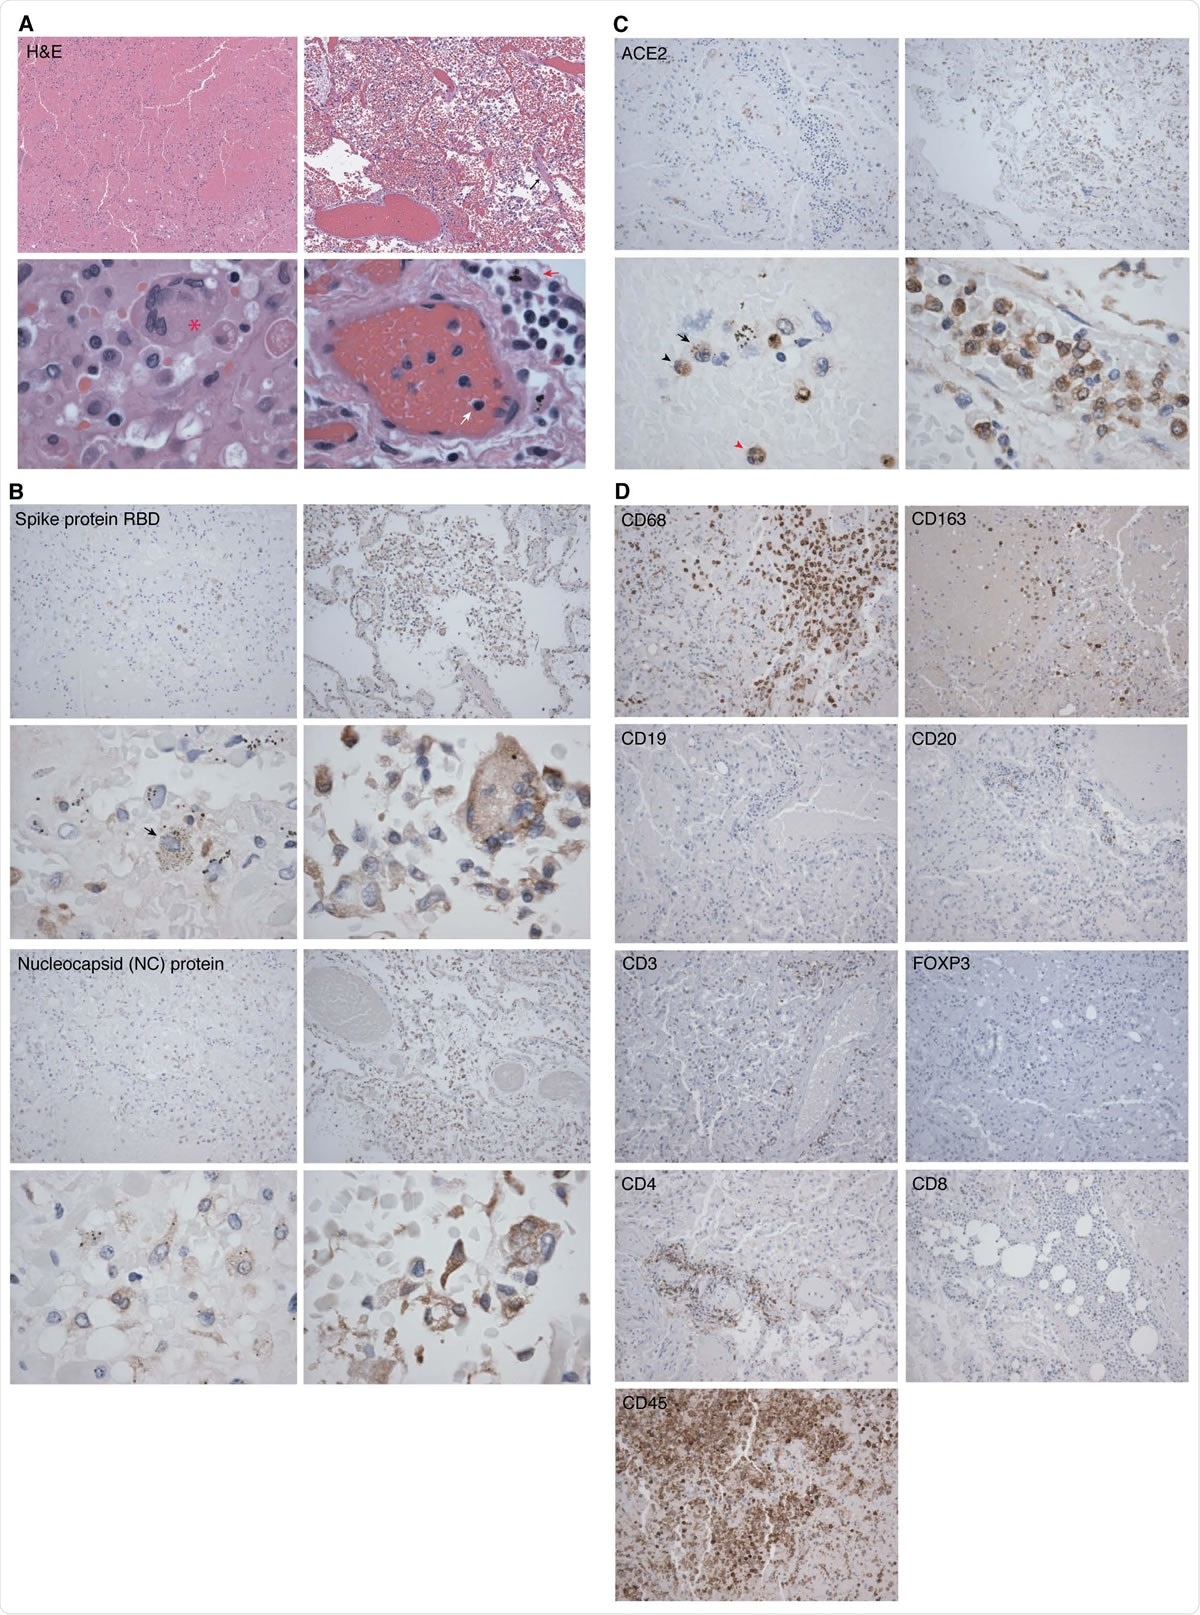 Representative hematoxylin-eosin (H&E) and immunohistochemistry (IHC) staining images of SARS-CoV-2 proteins and markers of immune cells in lung tissues from two COVID-19 patients.